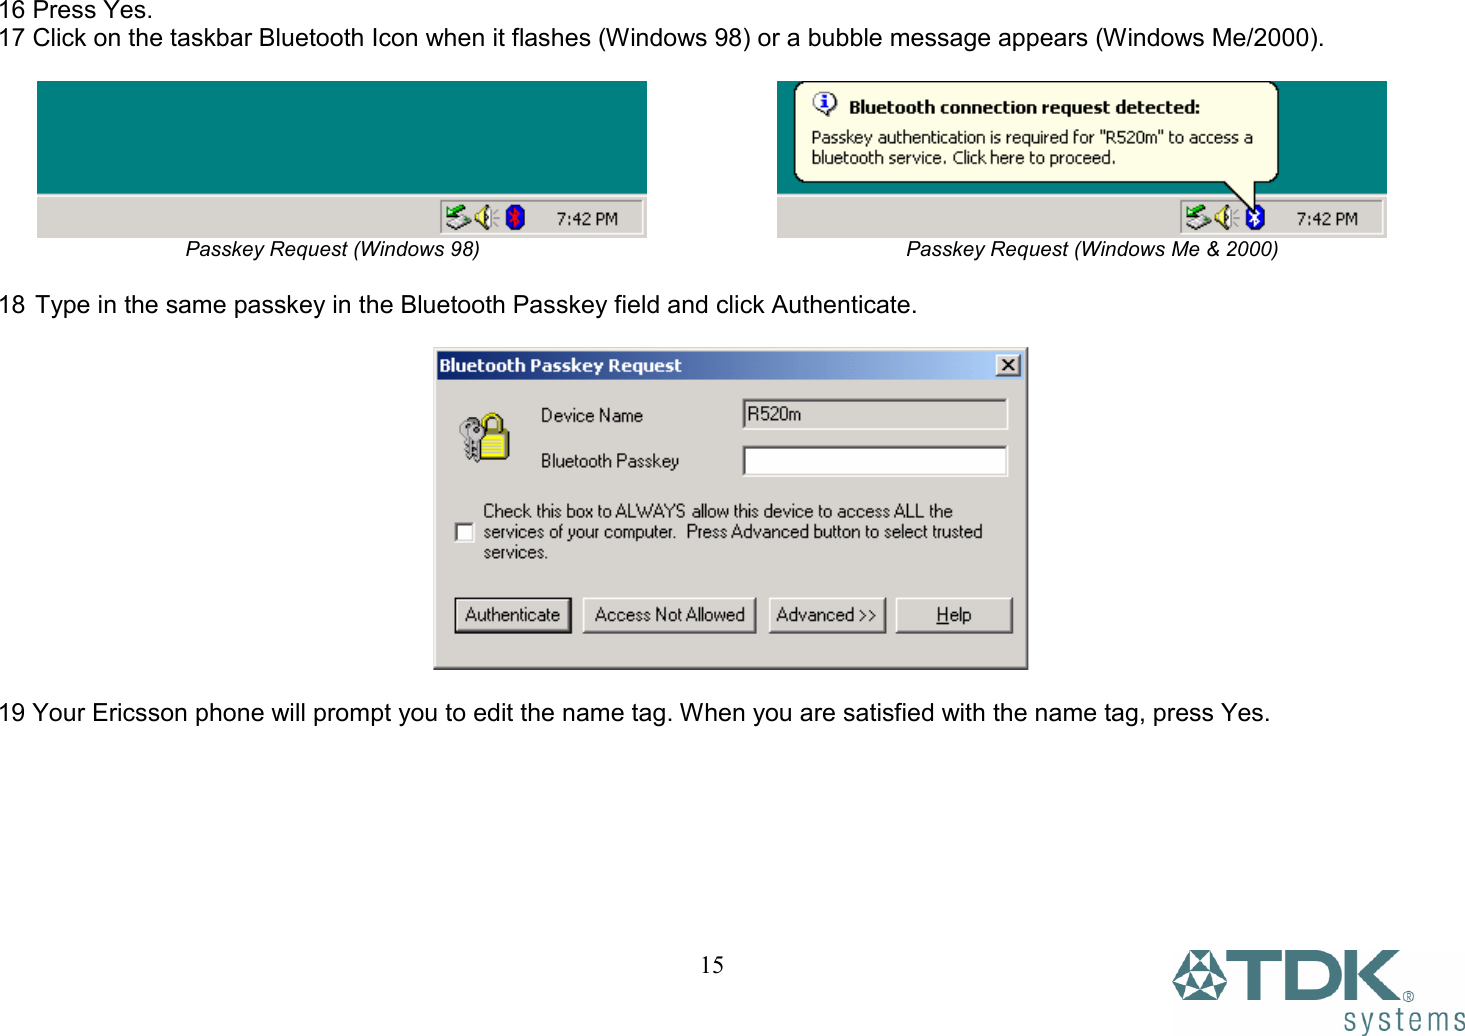   1516 Press Yes. 17 Click on the taskbar Bluetooth Icon when it flashes (Windows 98) or a bubble message appears (Windows Me/2000).                                            Passkey Request (Windows 98)                        Passkey Request (Windows Me &amp; 2000)  18 Type in the same passkey in the Bluetooth Passkey field and click Authenticate.    19 Your Ericsson phone will prompt you to edit the name tag. When you are satisfied with the name tag, press Yes.    